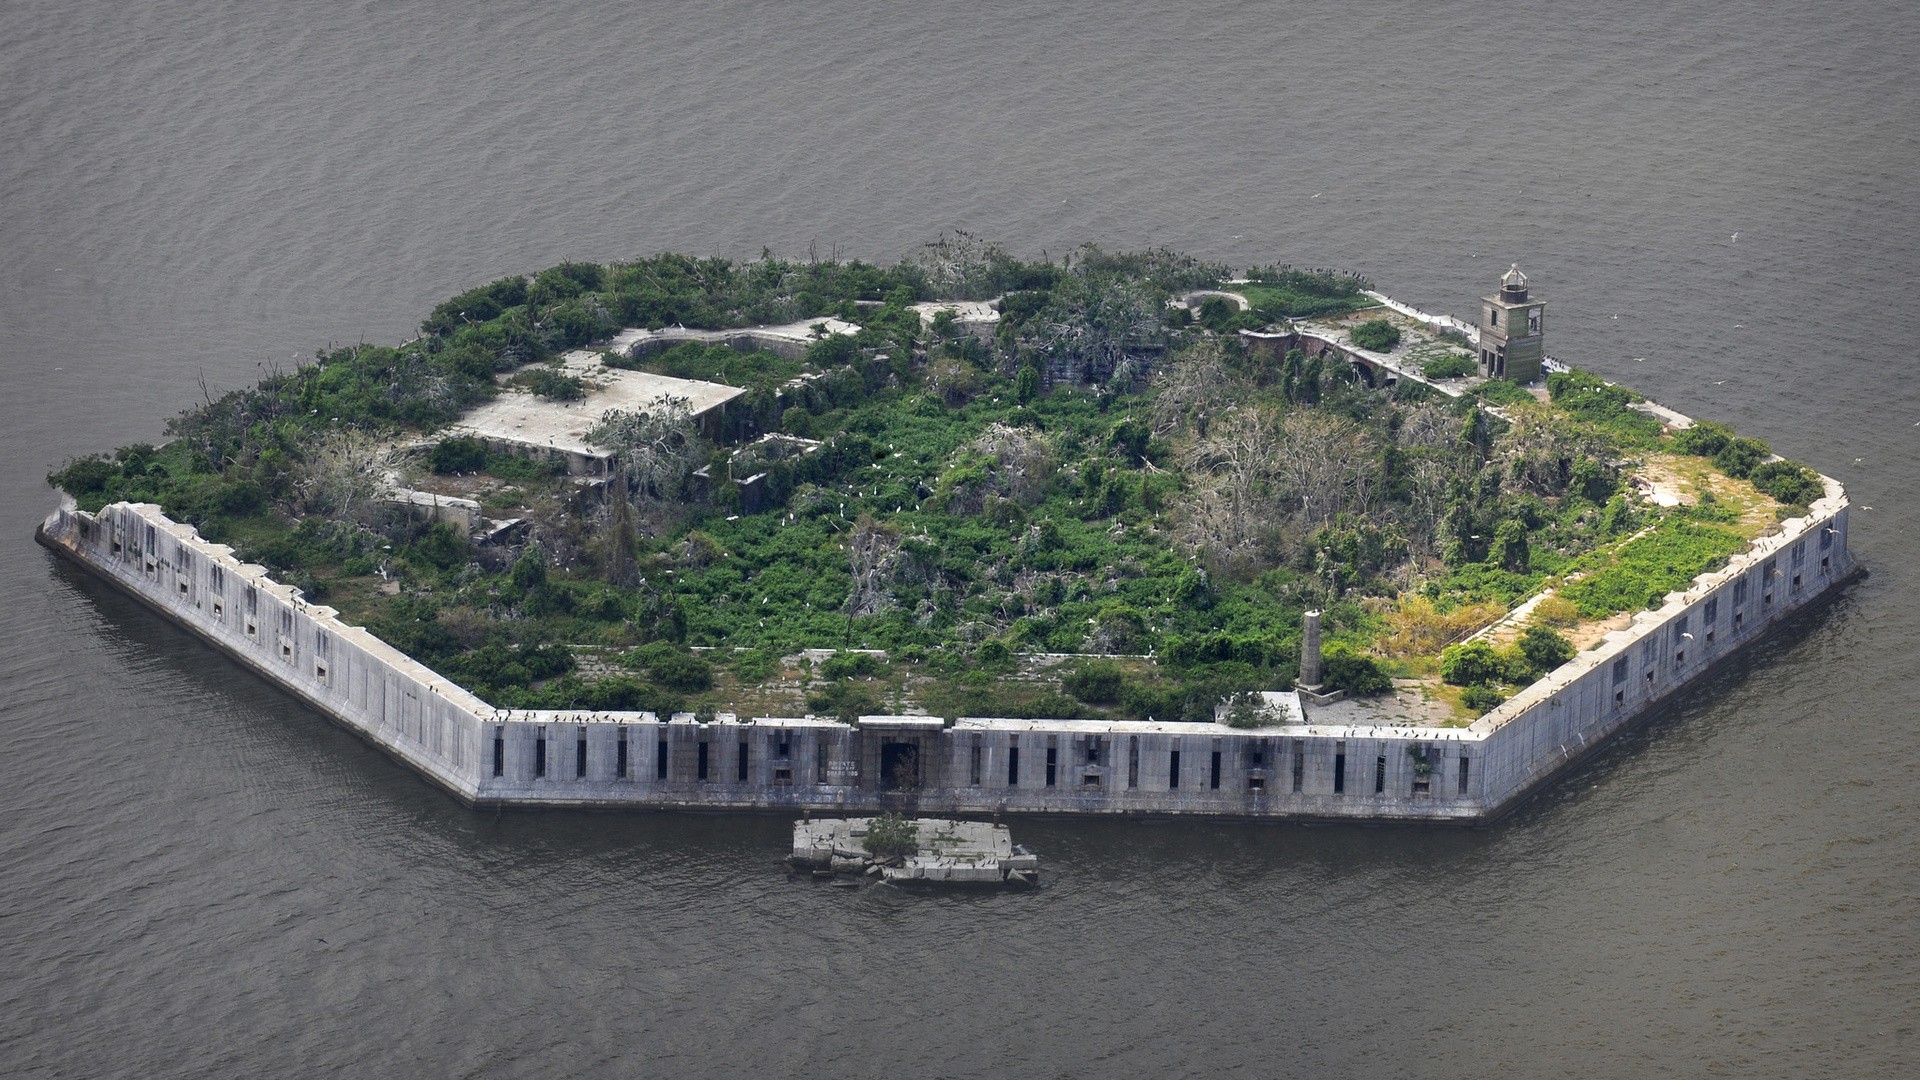 General 1920x1080 architecture island forts fortress sea wall aerial view abandoned overgrown tower plants trees Baltimore USA ancient hexagon Fort Carroll Patapsco River ruins